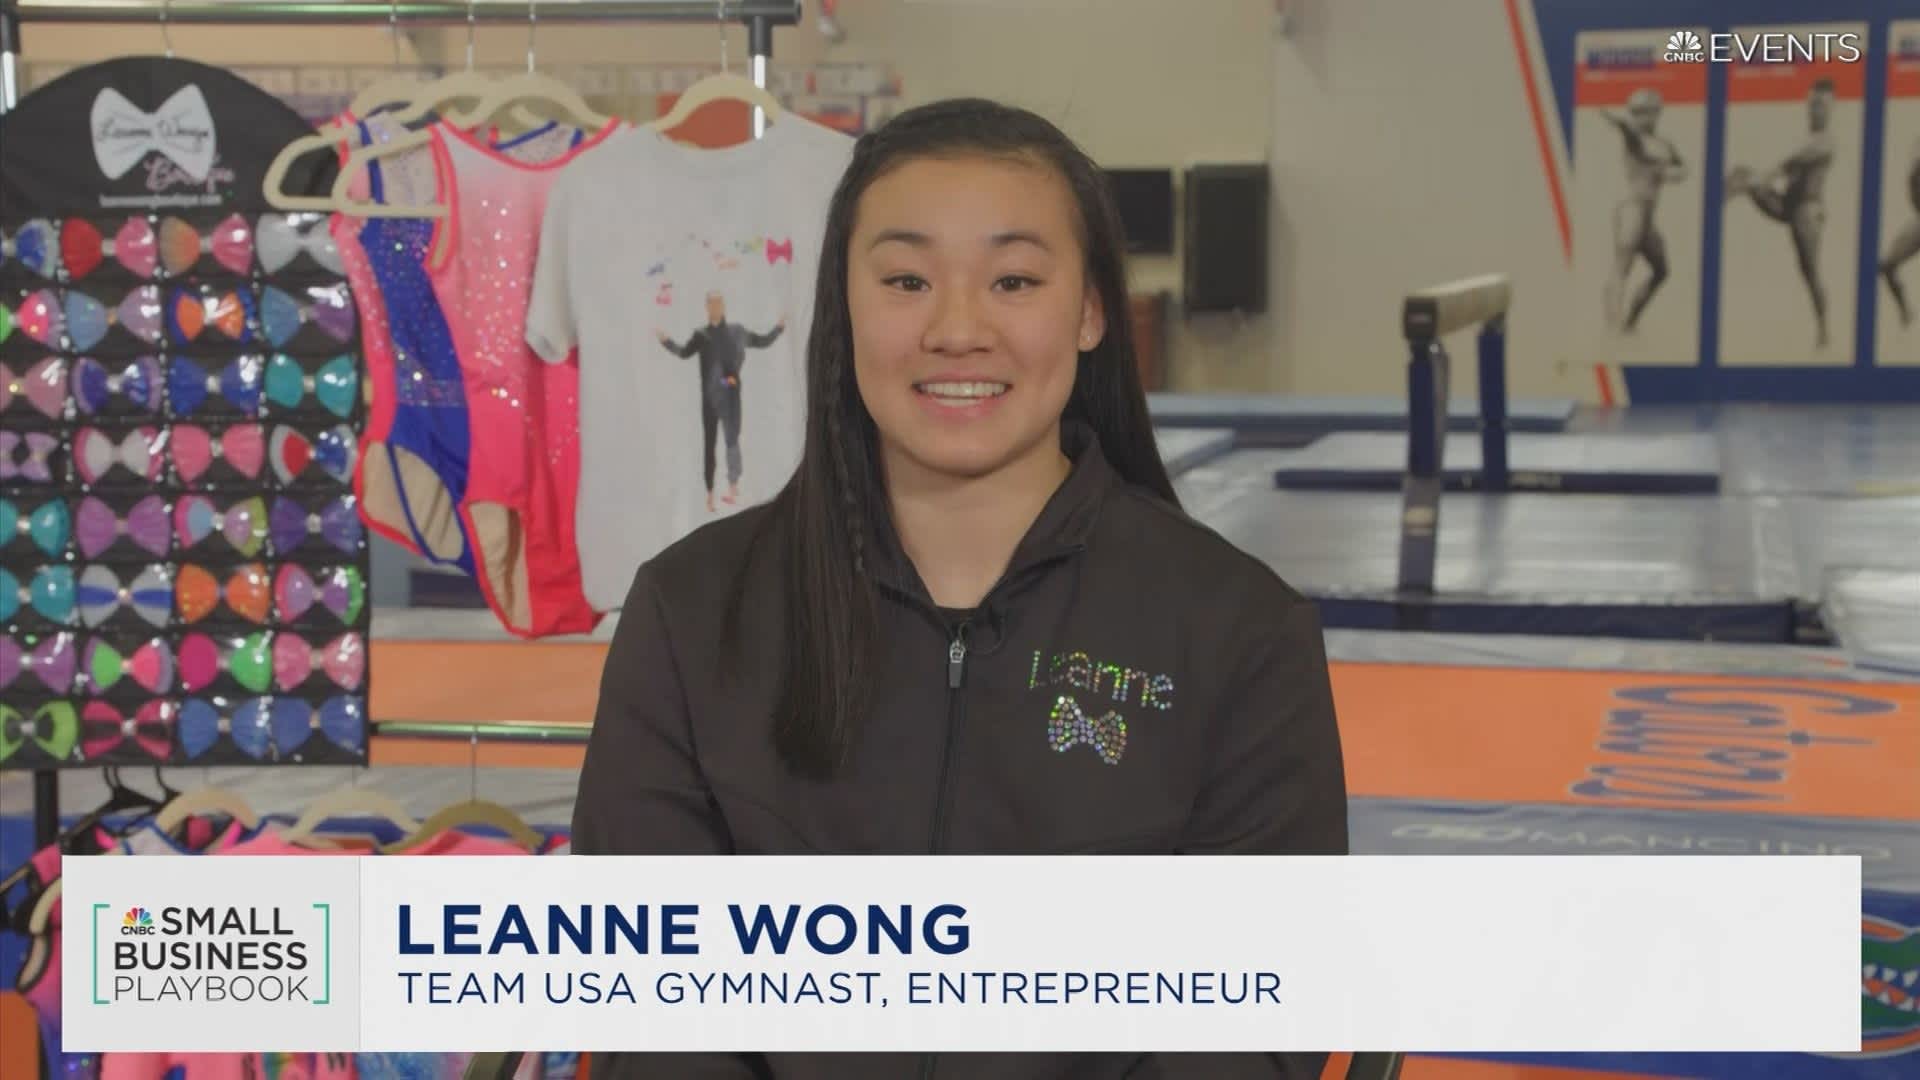 Applying an Olympic Mindset to Small Business [Video]